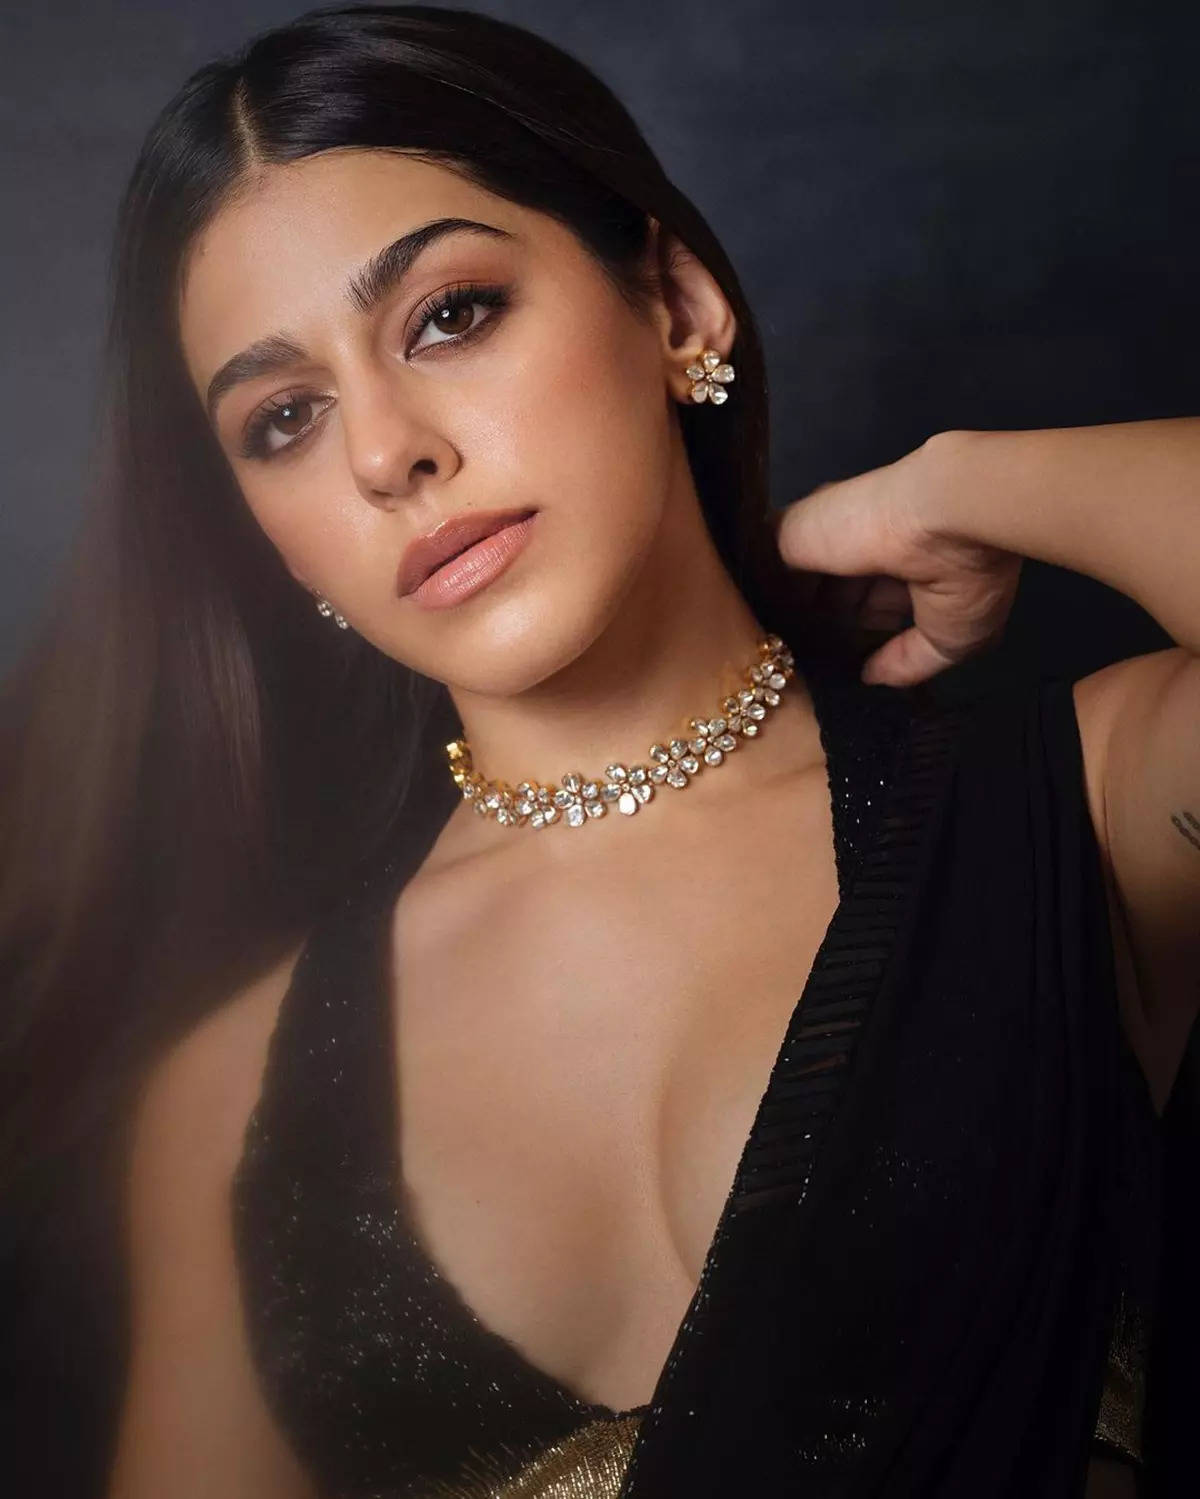 Bewitching pictures of Pooja Bedi’s daughter Alaya Furniturewalla you simply can’t miss!